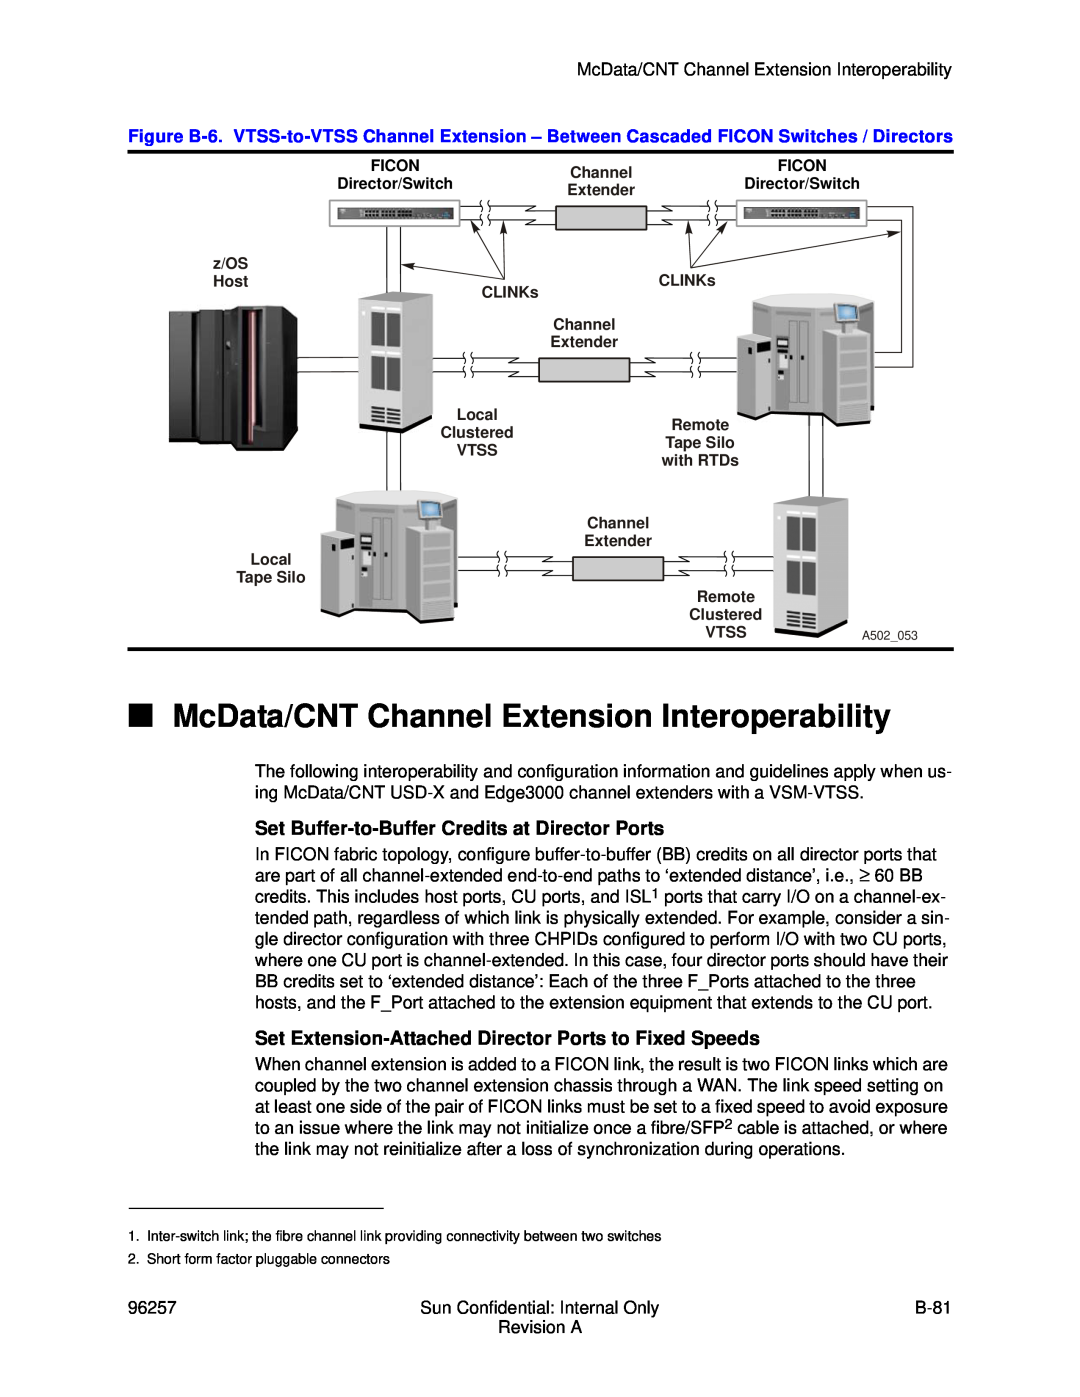 Sun Microsystems 96257 manual McData/CNT Channel Extension Interoperability, Set Buffer-to-Buffer Credits at Director Ports 